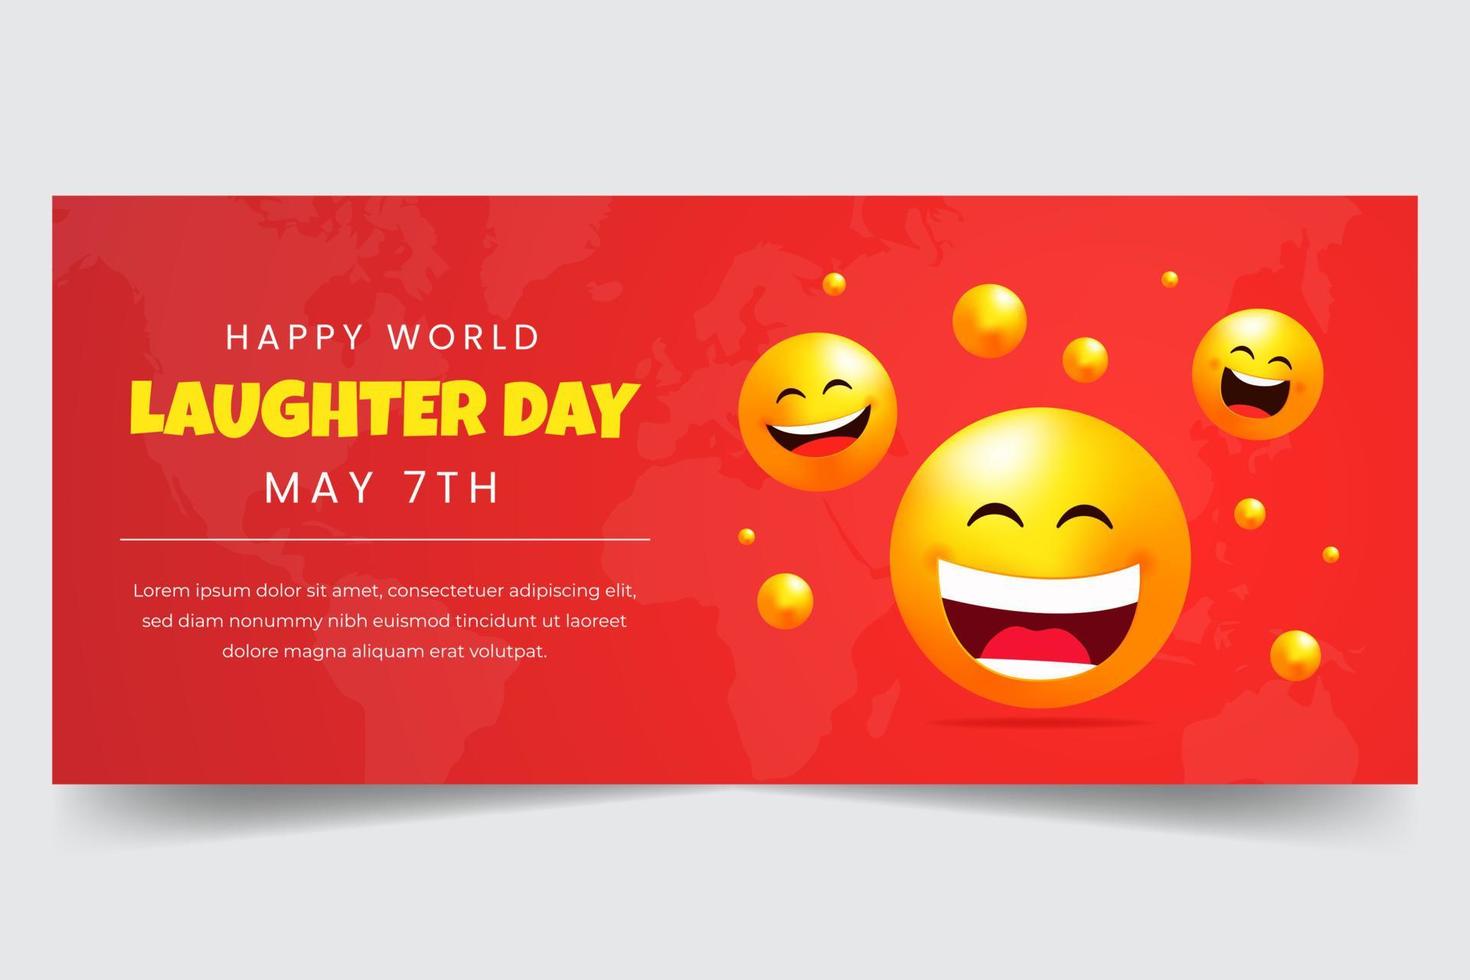 Happy world laughter day May 7th horizontal banner with emoticons illustration vector